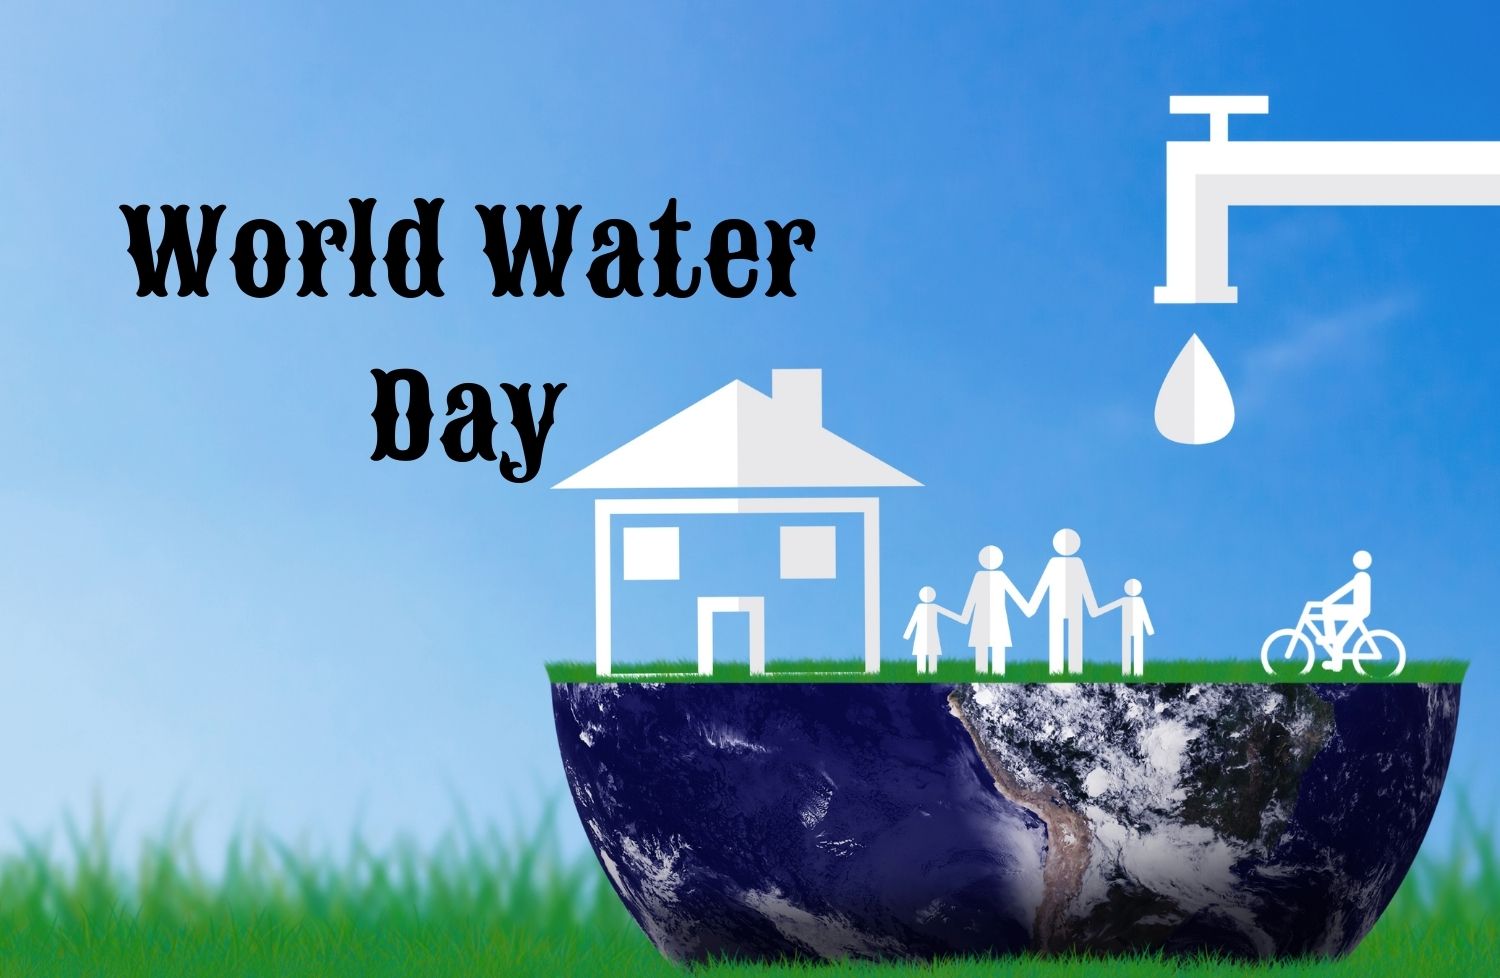 2023 ⇒ How Many Days Until World Water Day?